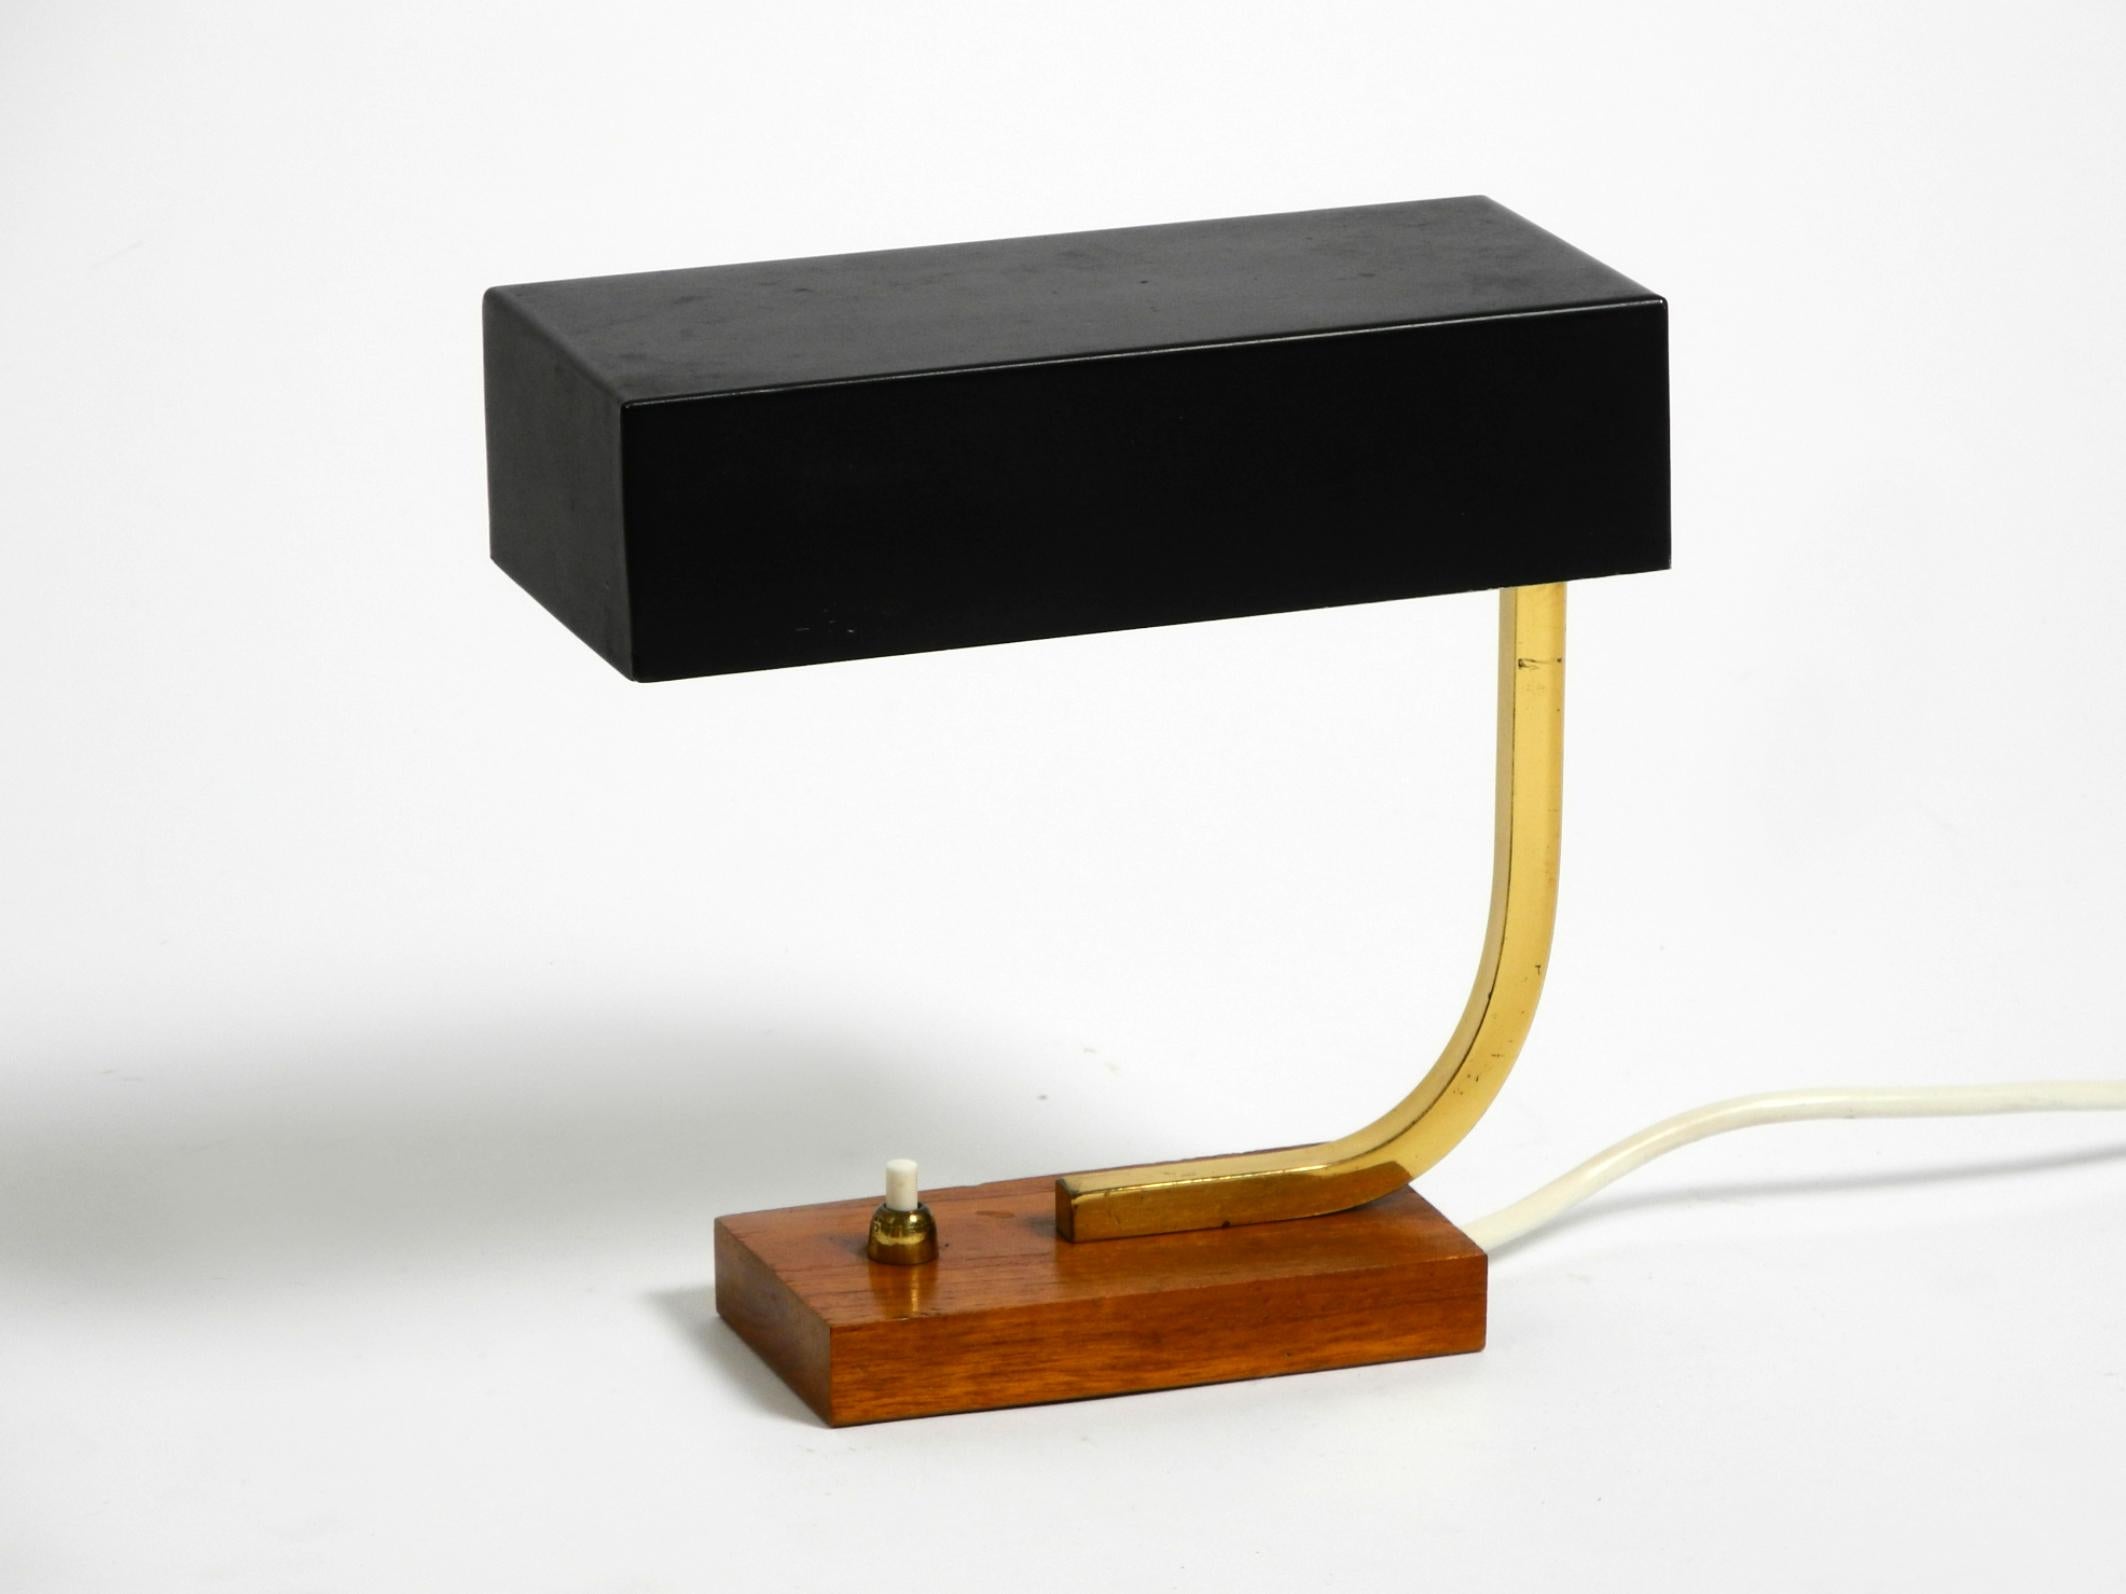 Beautiful Mid Century Modern metal and brass table lamp.
Great minimalist 1950s design. Made in Germany.
Very rare with a rectangular shade, steplessly rotatable.
Very high quality, metal shade, brass neck. Teak base.
Very good vintage condition